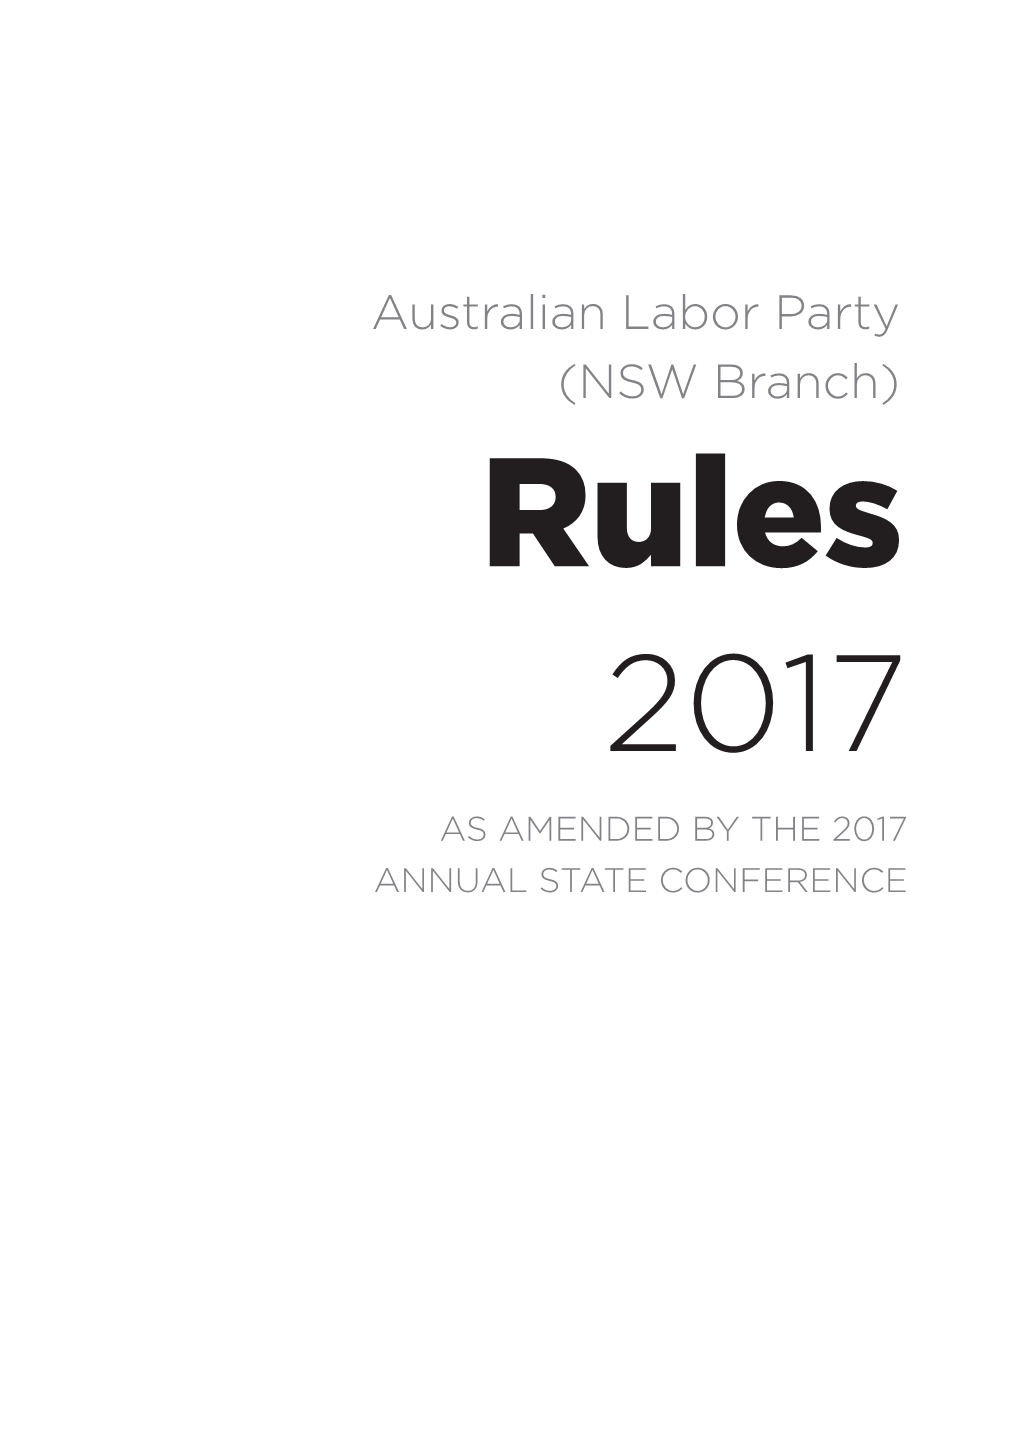 Australian Labor Party (NSW Branch) Rules 2017 AS AMENDED by the 2017 ANNUAL STATE CONFERENCE RULES 2017